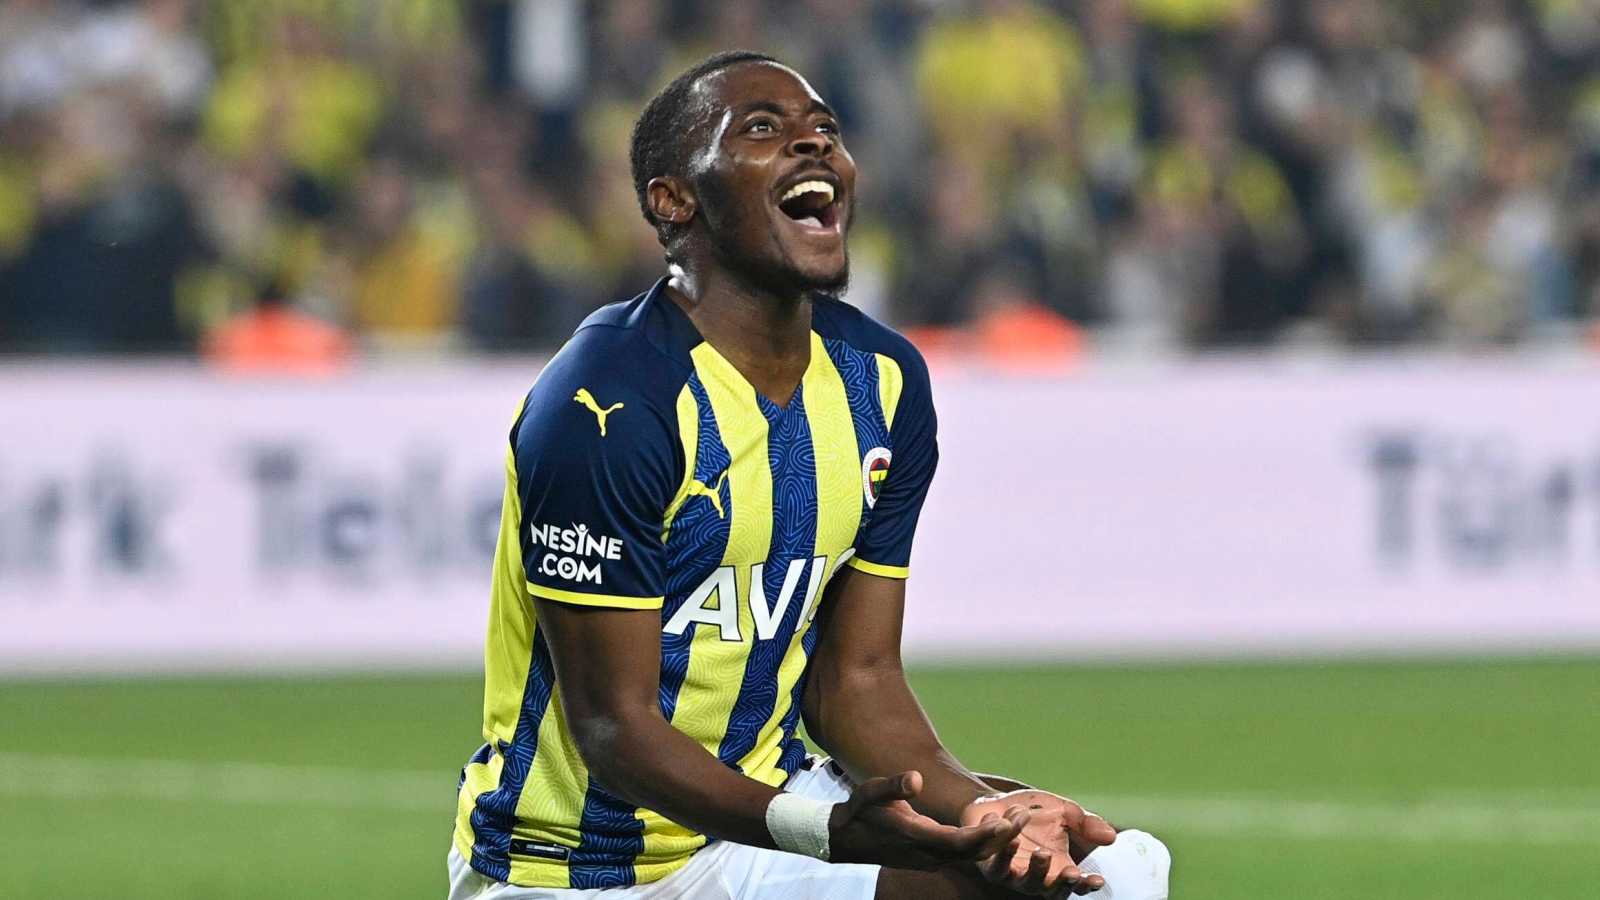 Bright-Osayi-Samuel-on-his-knees-during-a-Fenerbahce-game